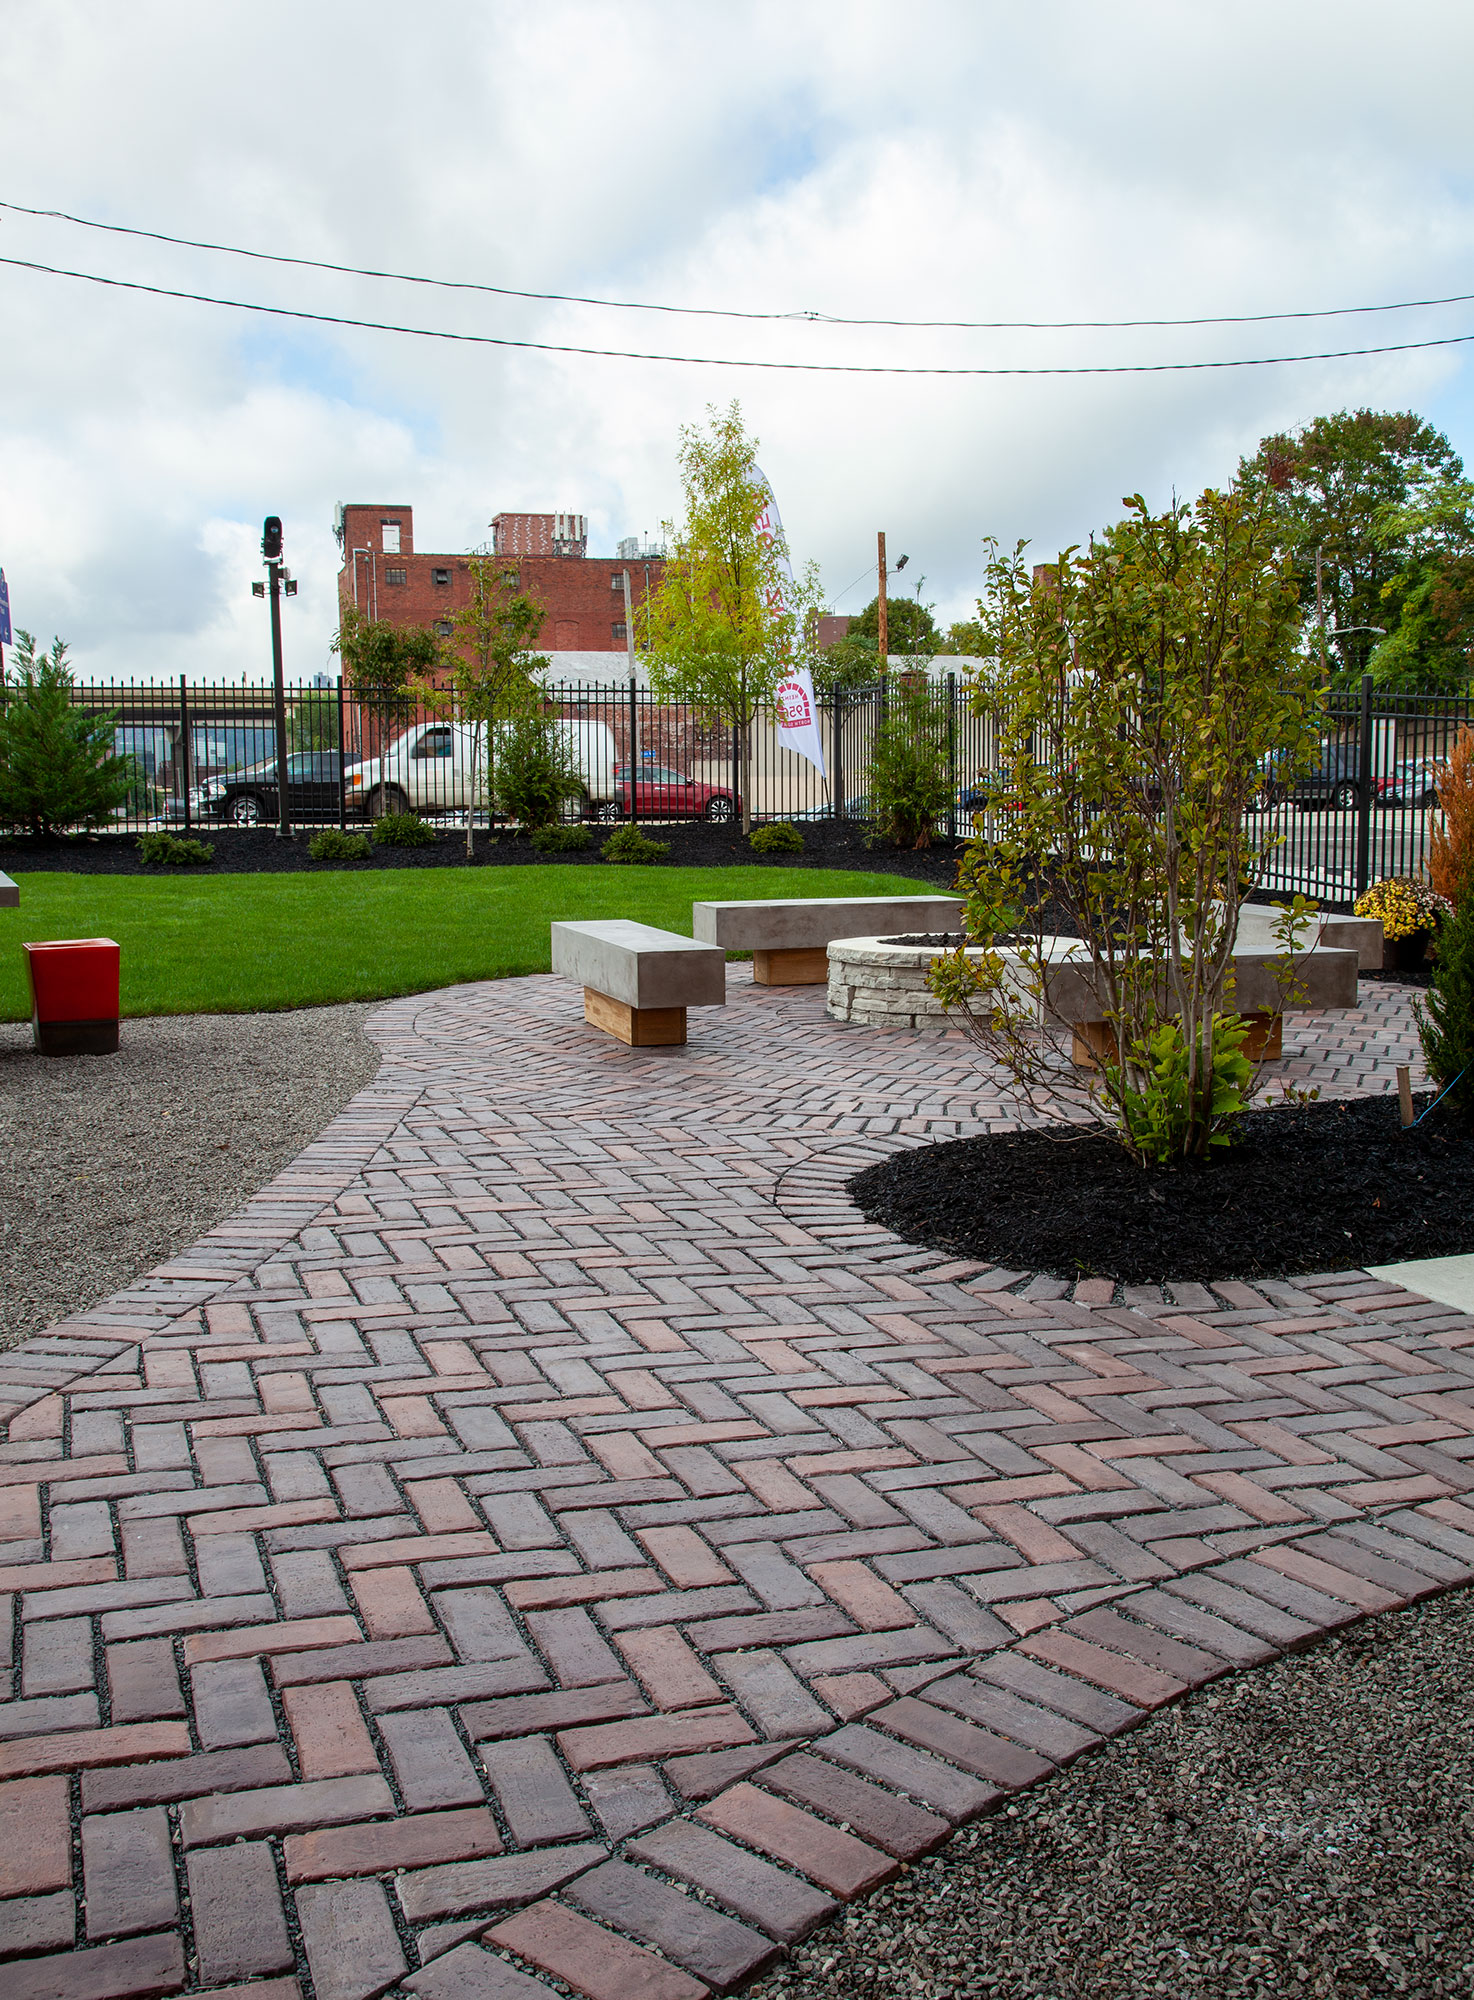 A circular fire pit and stone benches are surrounded by tri-colored Town Hall pavers, with nearby bushes adding subtle flecks of color.